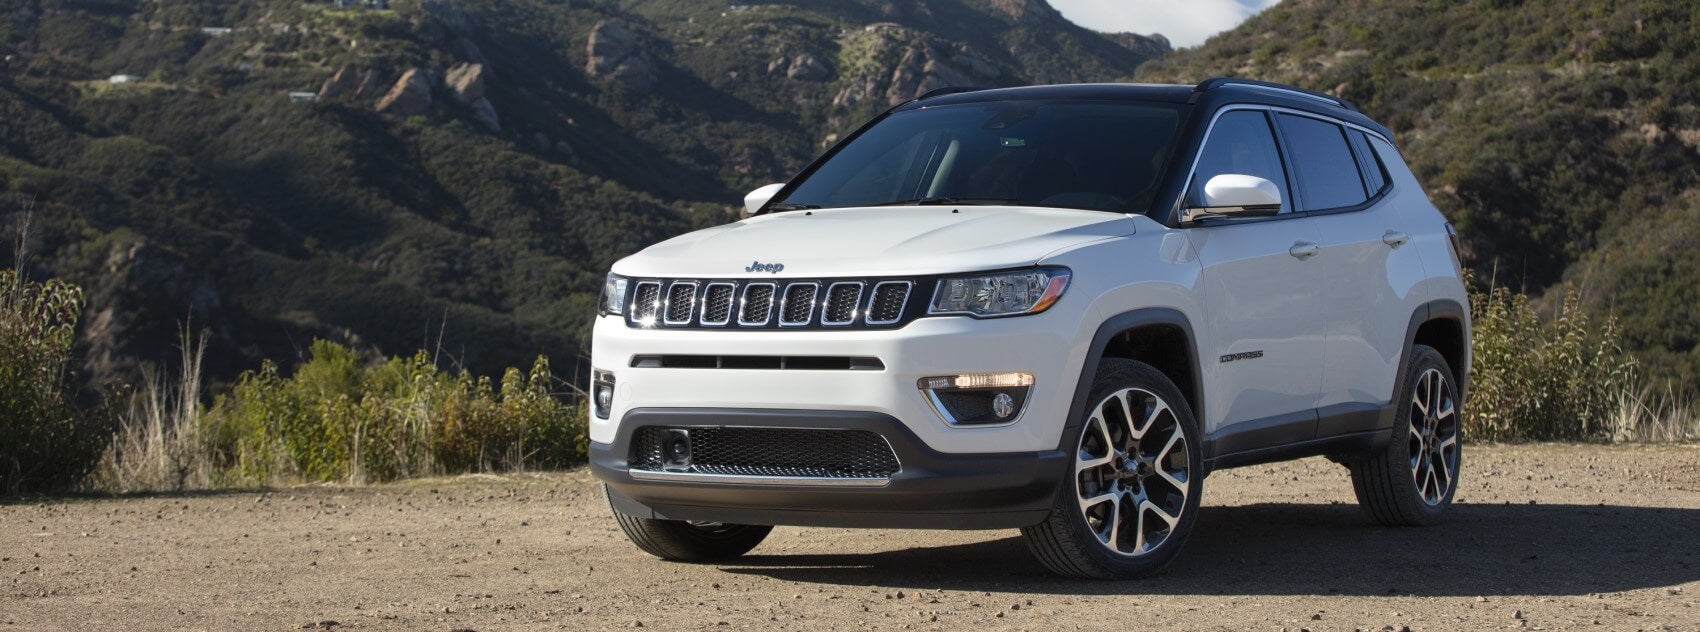 Jeep Compass Lease Deals near Woodhaven MI